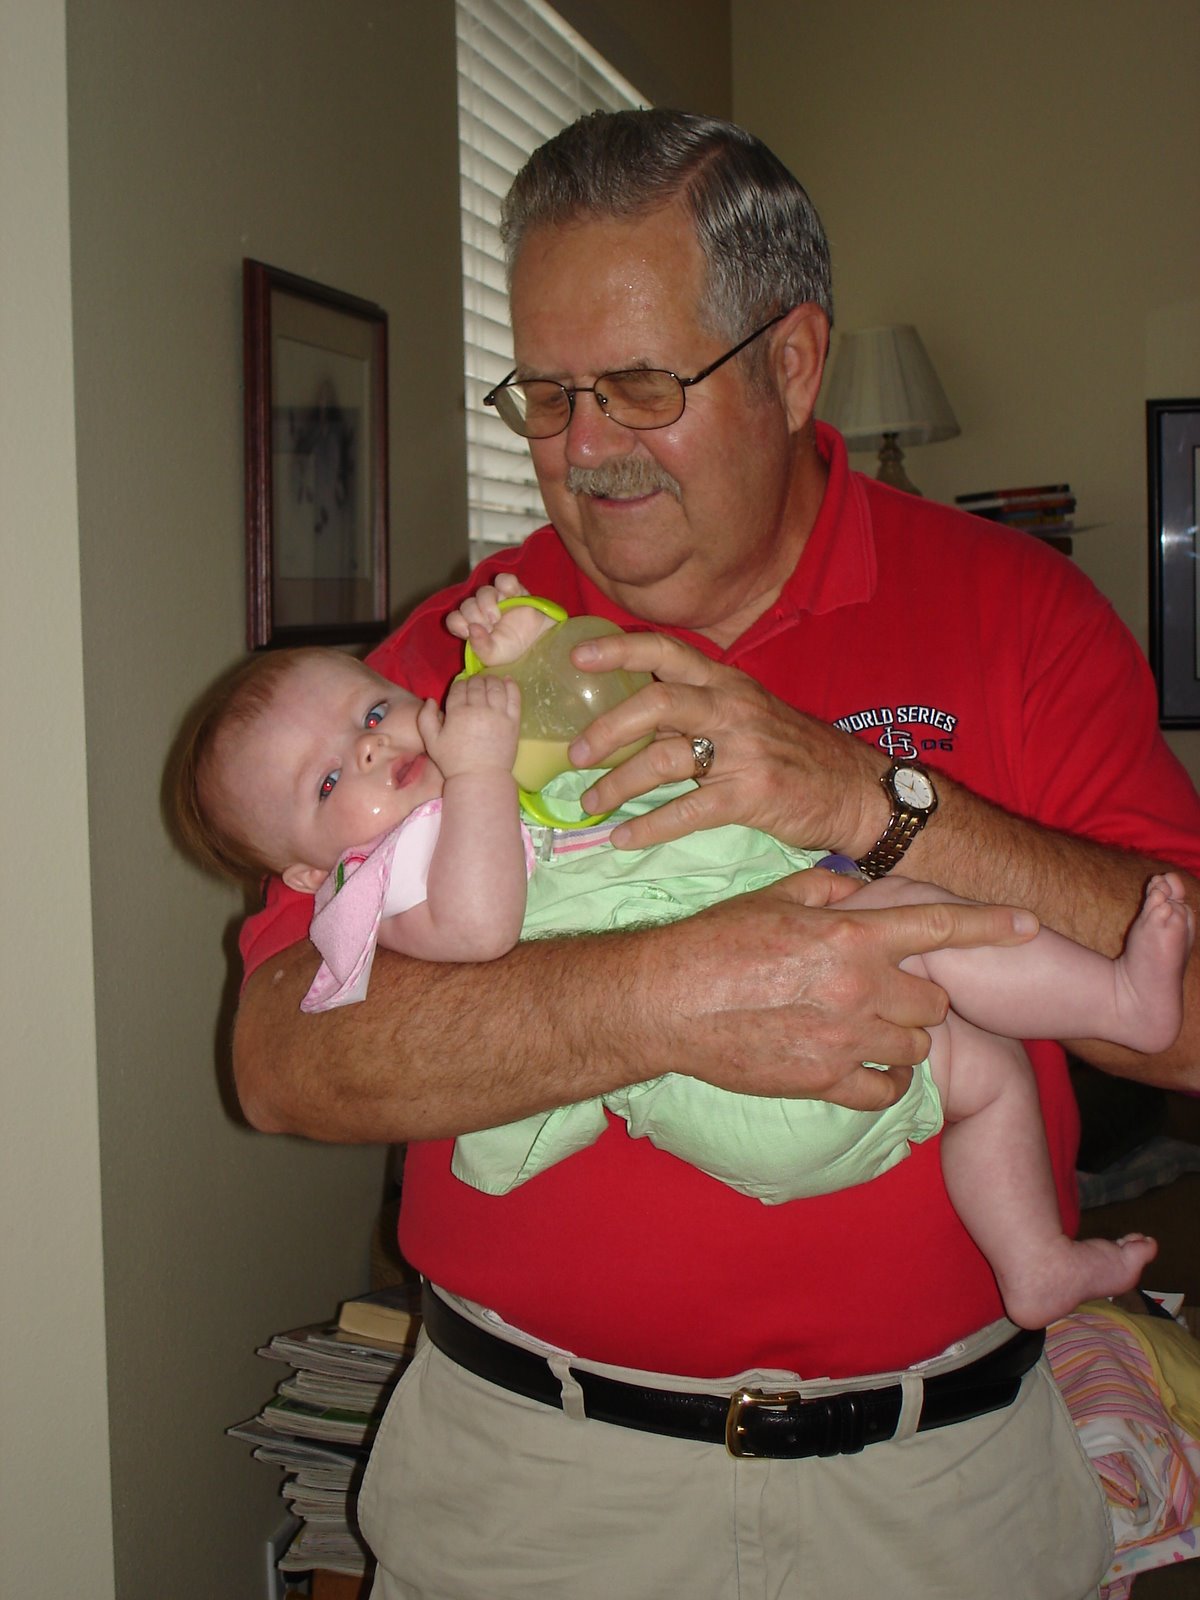 [Spoiled+Rotten+Baby+Bryleigh+With+Her+Sippy+Cup+And+Her+Papa+Ron+-+04+01+08.jpg]